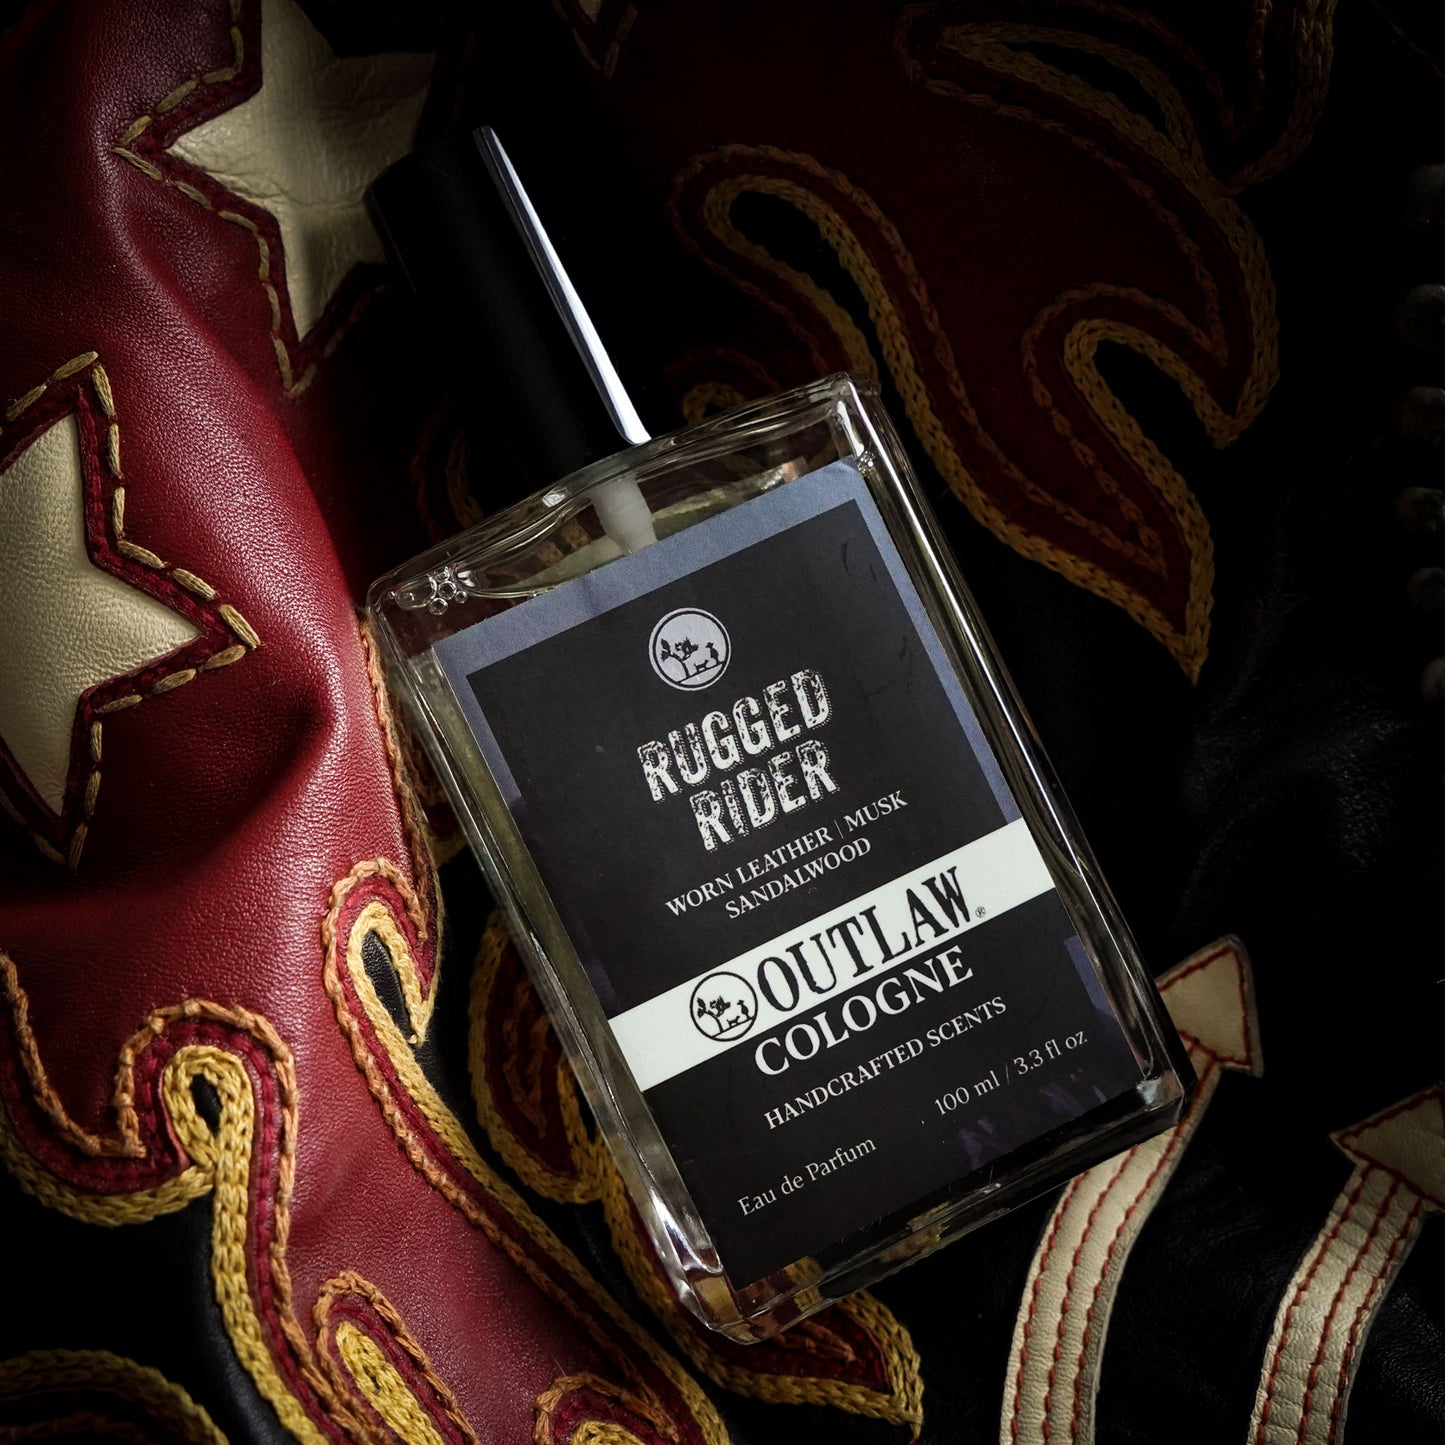 Outlaw's Rugged Rider Cologne for Men and Women smells like leather, musk, and sandalwood